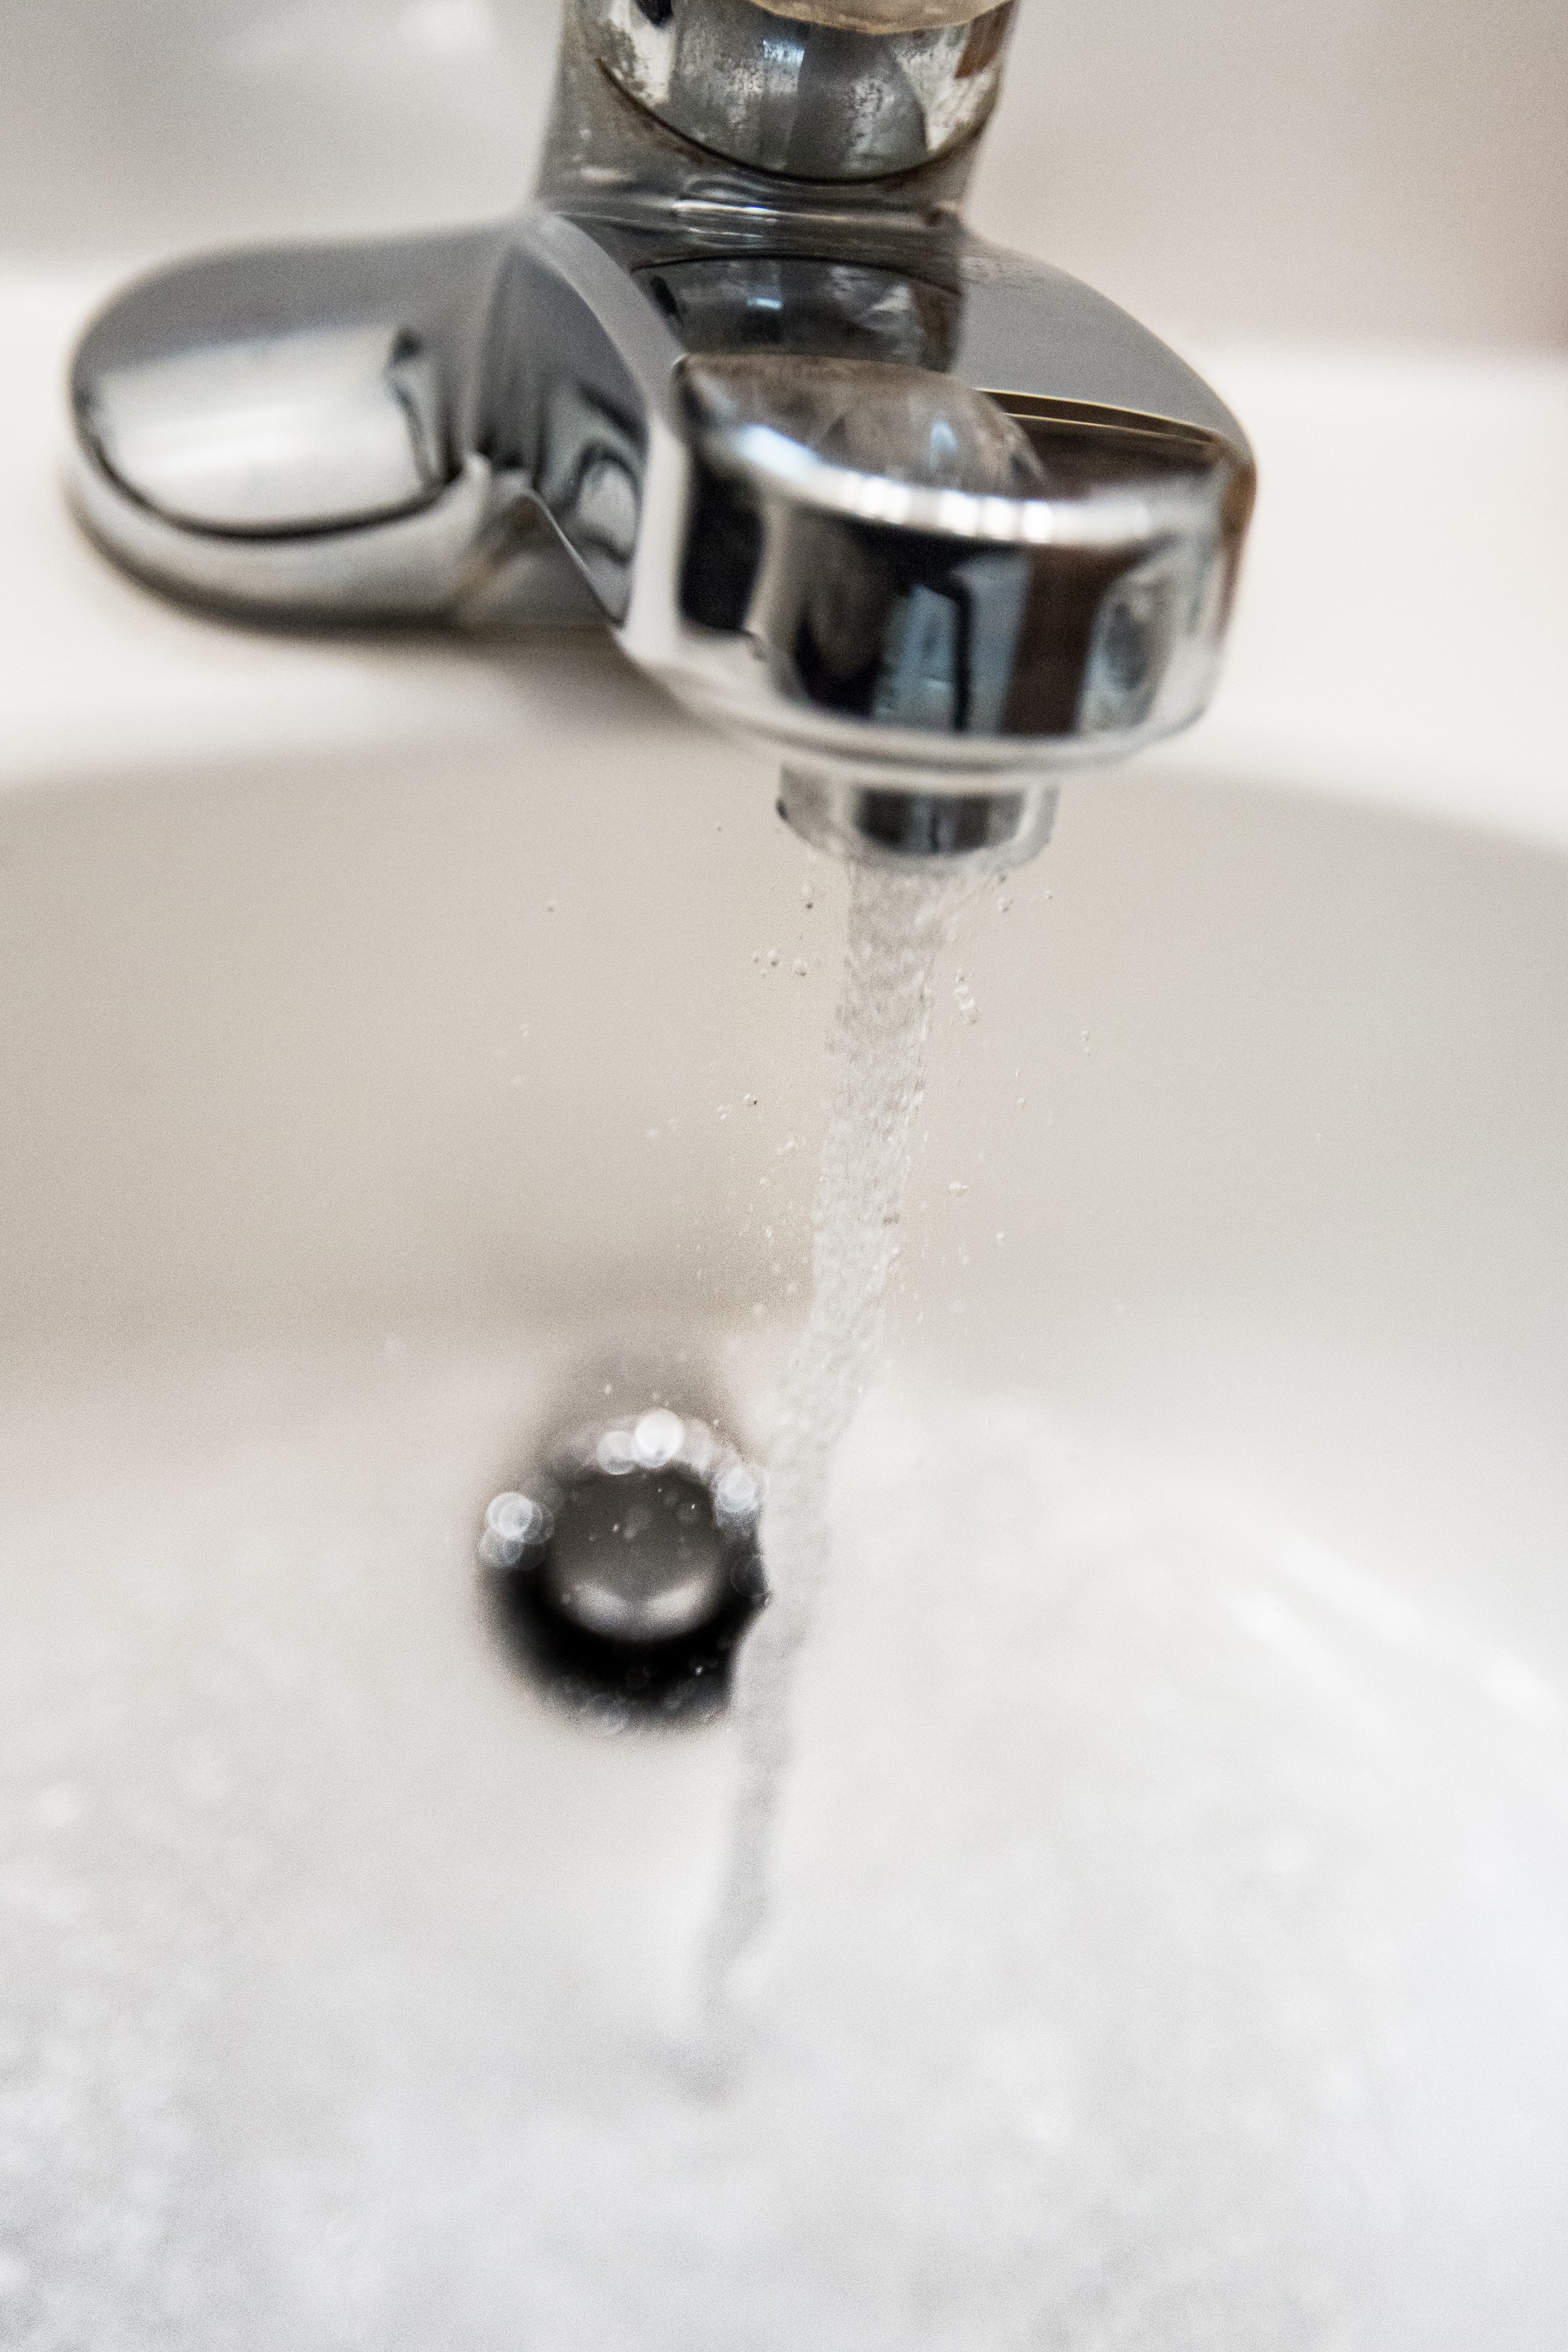 City Of Long Beach Water Conservation Rebates